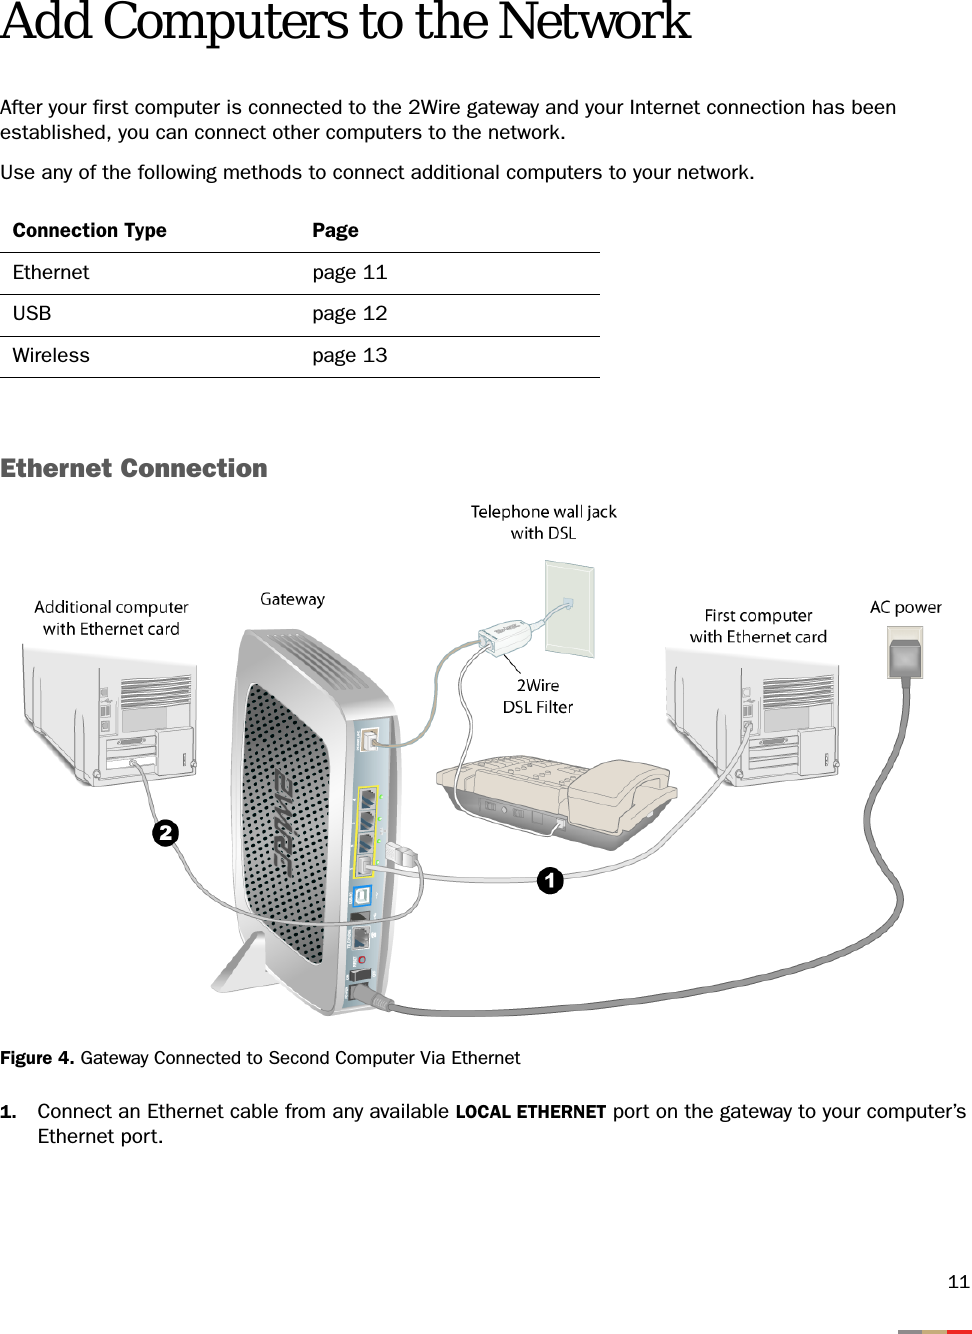 11Add Computers to the NetworkAfter your first computer is connected to the 2Wire gateway and your Internet connection has been established, you can connect other computers to the network.Use any of the following methods to connect additional computers to your network.Ethernet ConnectionFigure 4. Gateway Connected to Second Computer Via Ethernet1. Connect an Ethernet cable from any available LOCAL ETHERNET port on the gateway to your computer’s Ethernet port.Connection Type PageEthernet page 11USB page 12Wireless page 13